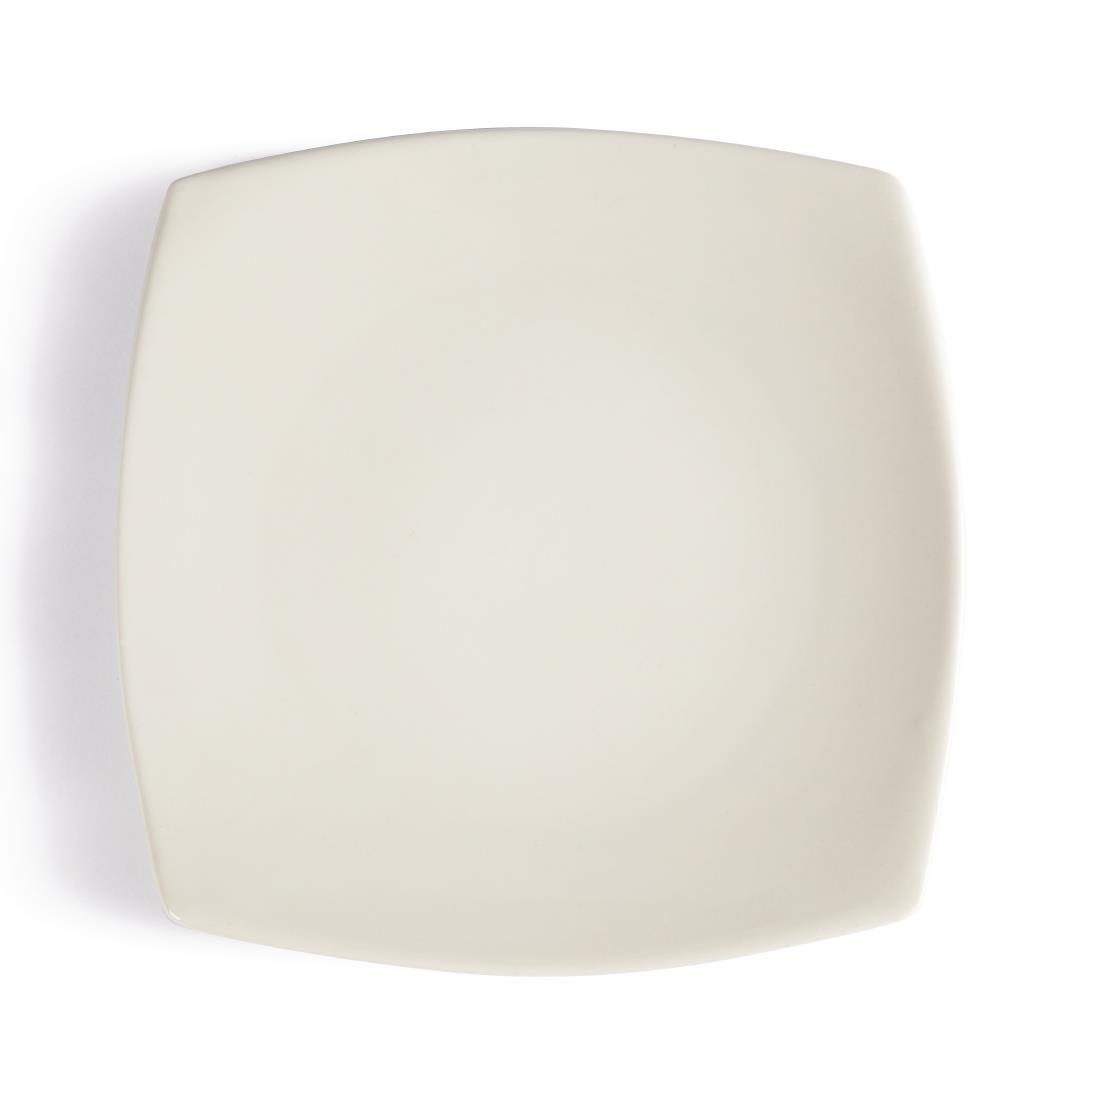 Olympia Ivory Round Square Plates 241mm (Pack of 12) - Y088  - 3